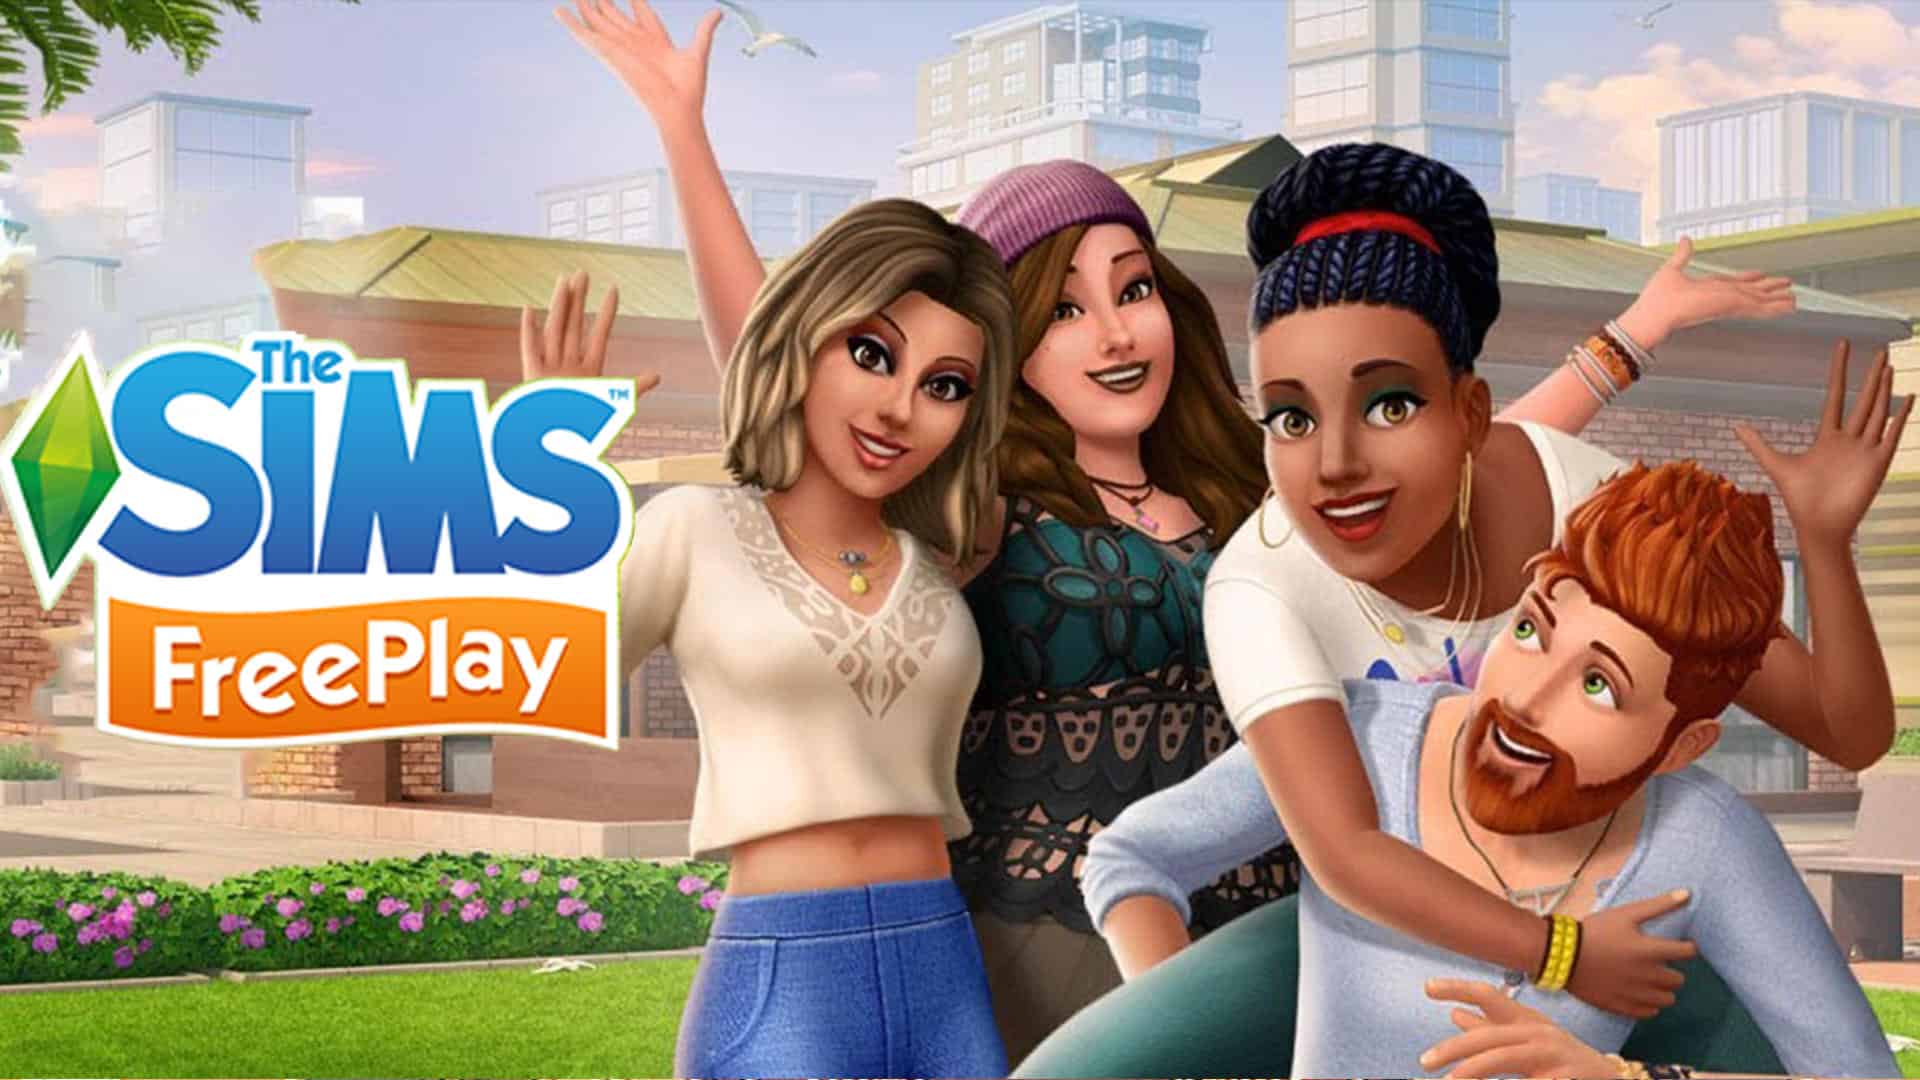 4 Reasons To Try The Sims FreePlay - Cheat Code Central